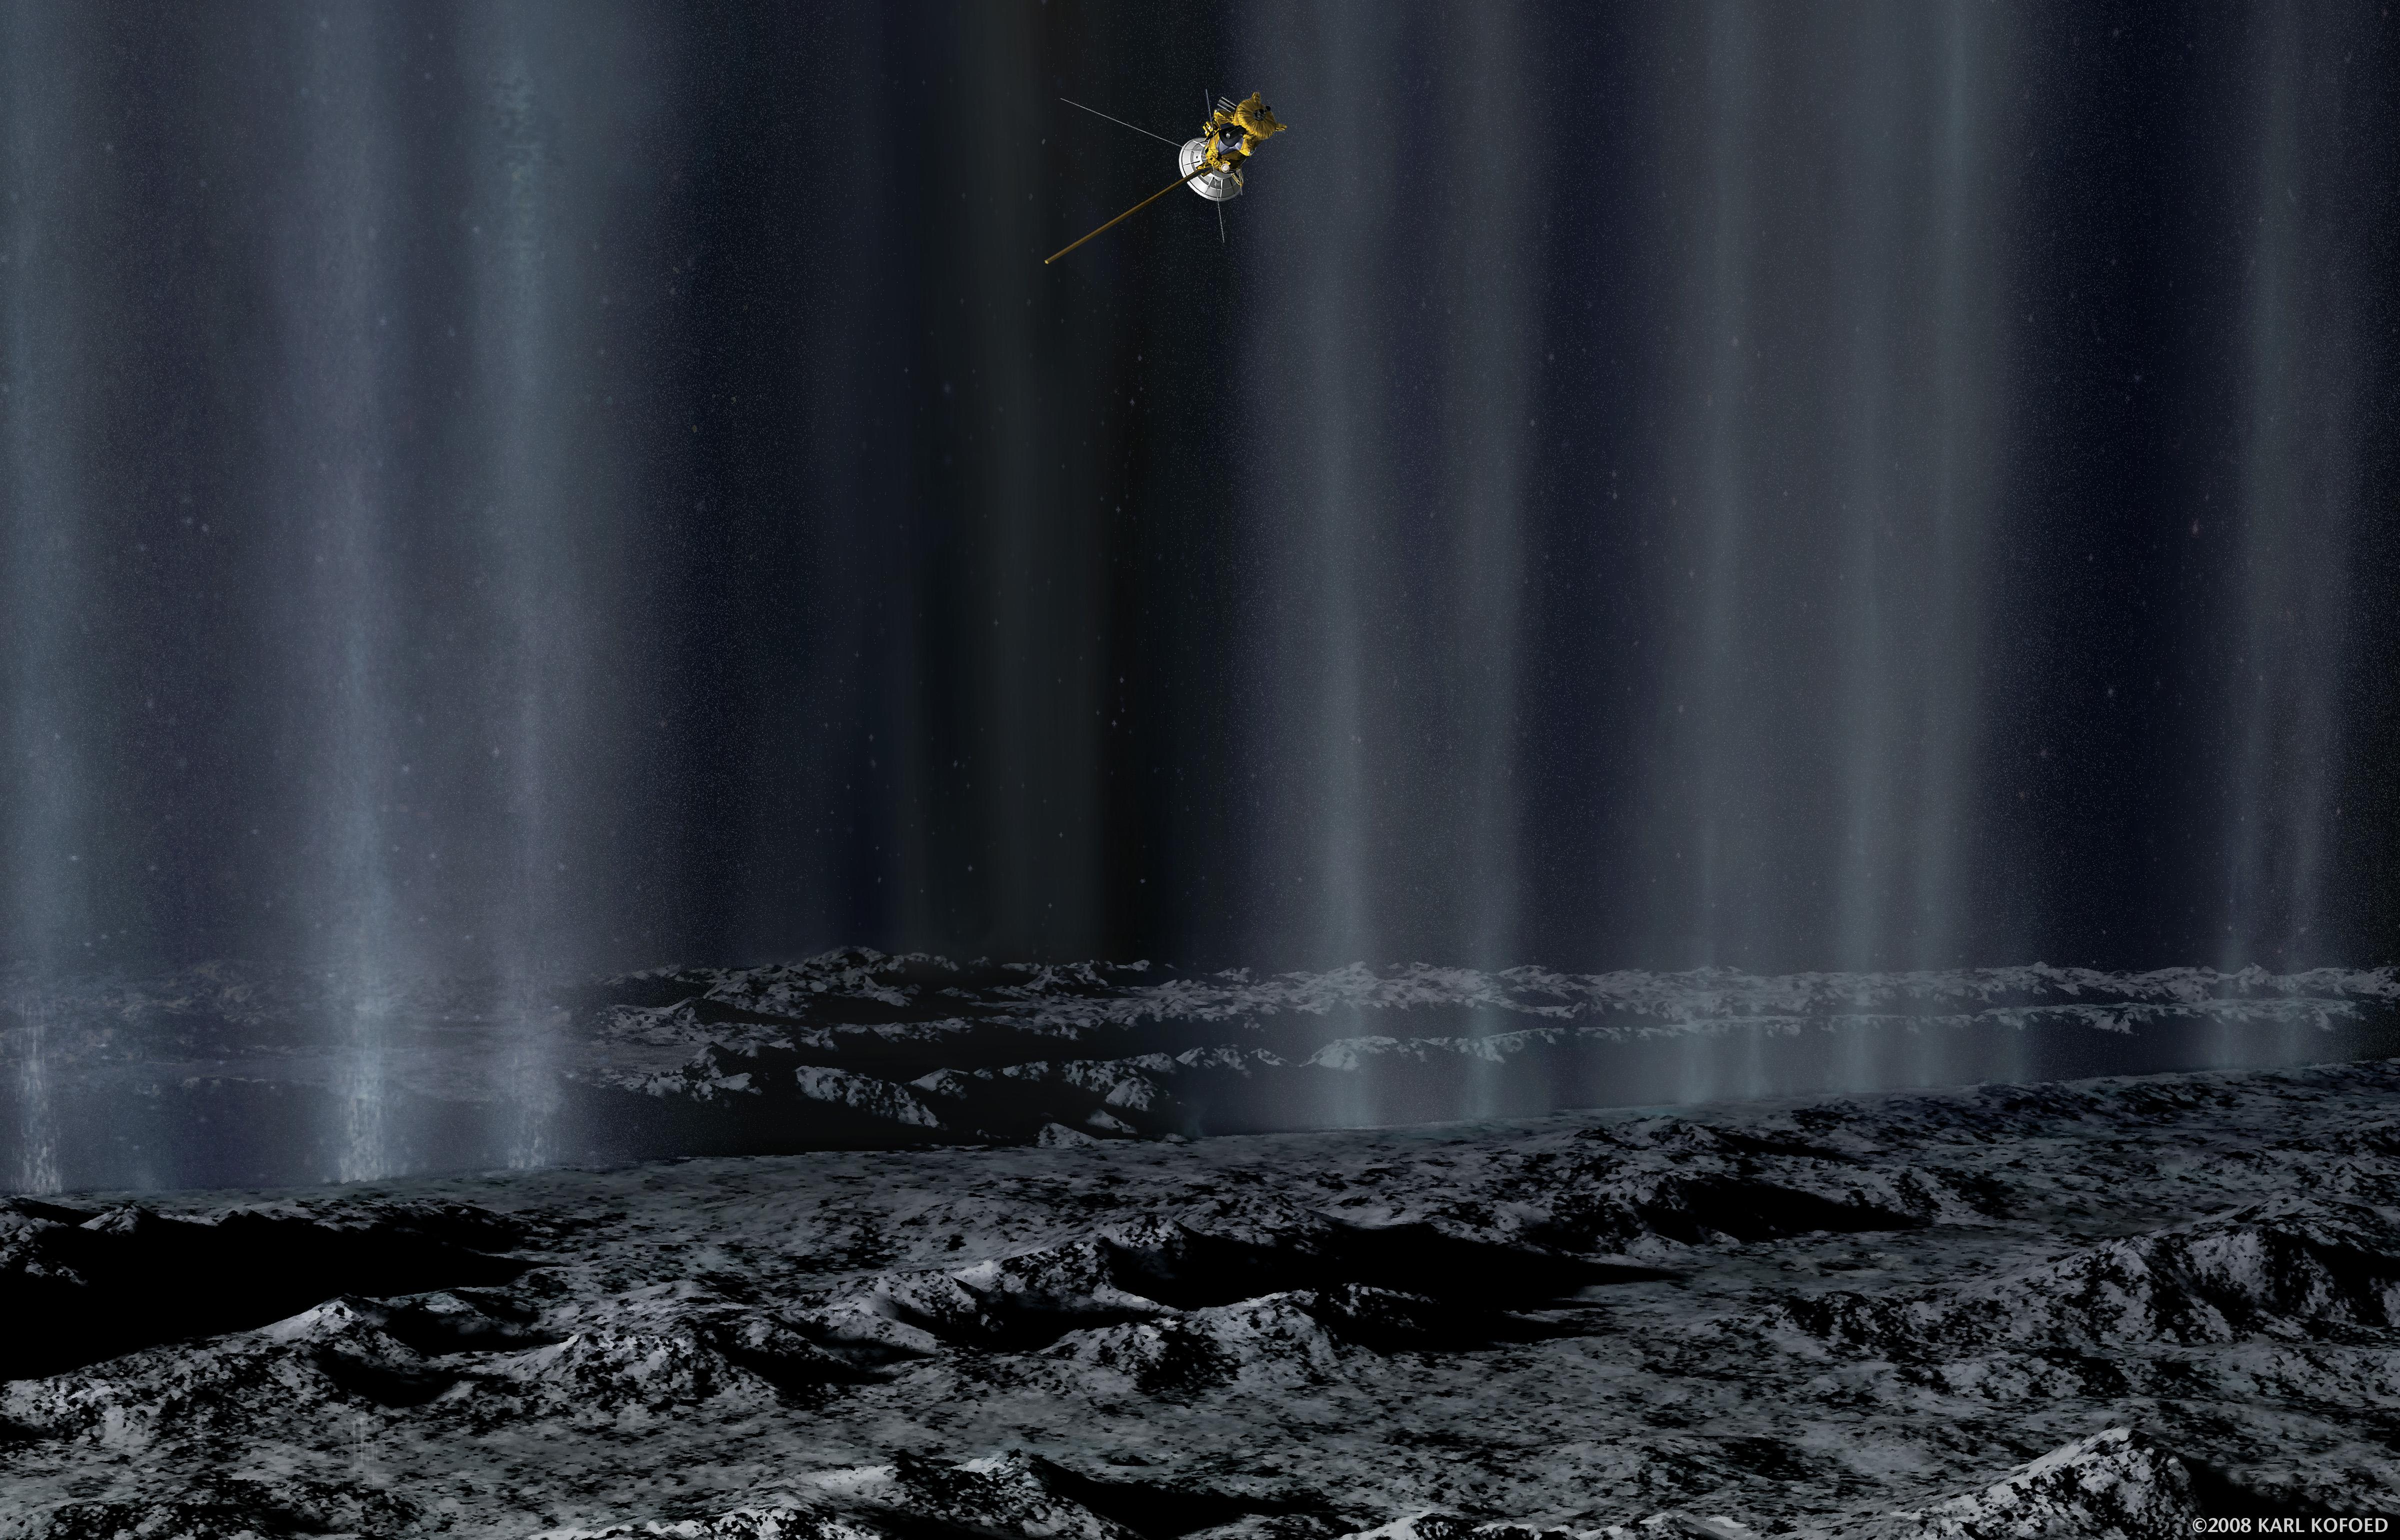 Artist's concept of a close flyby of Enceladus by the Cassini spacecraft.